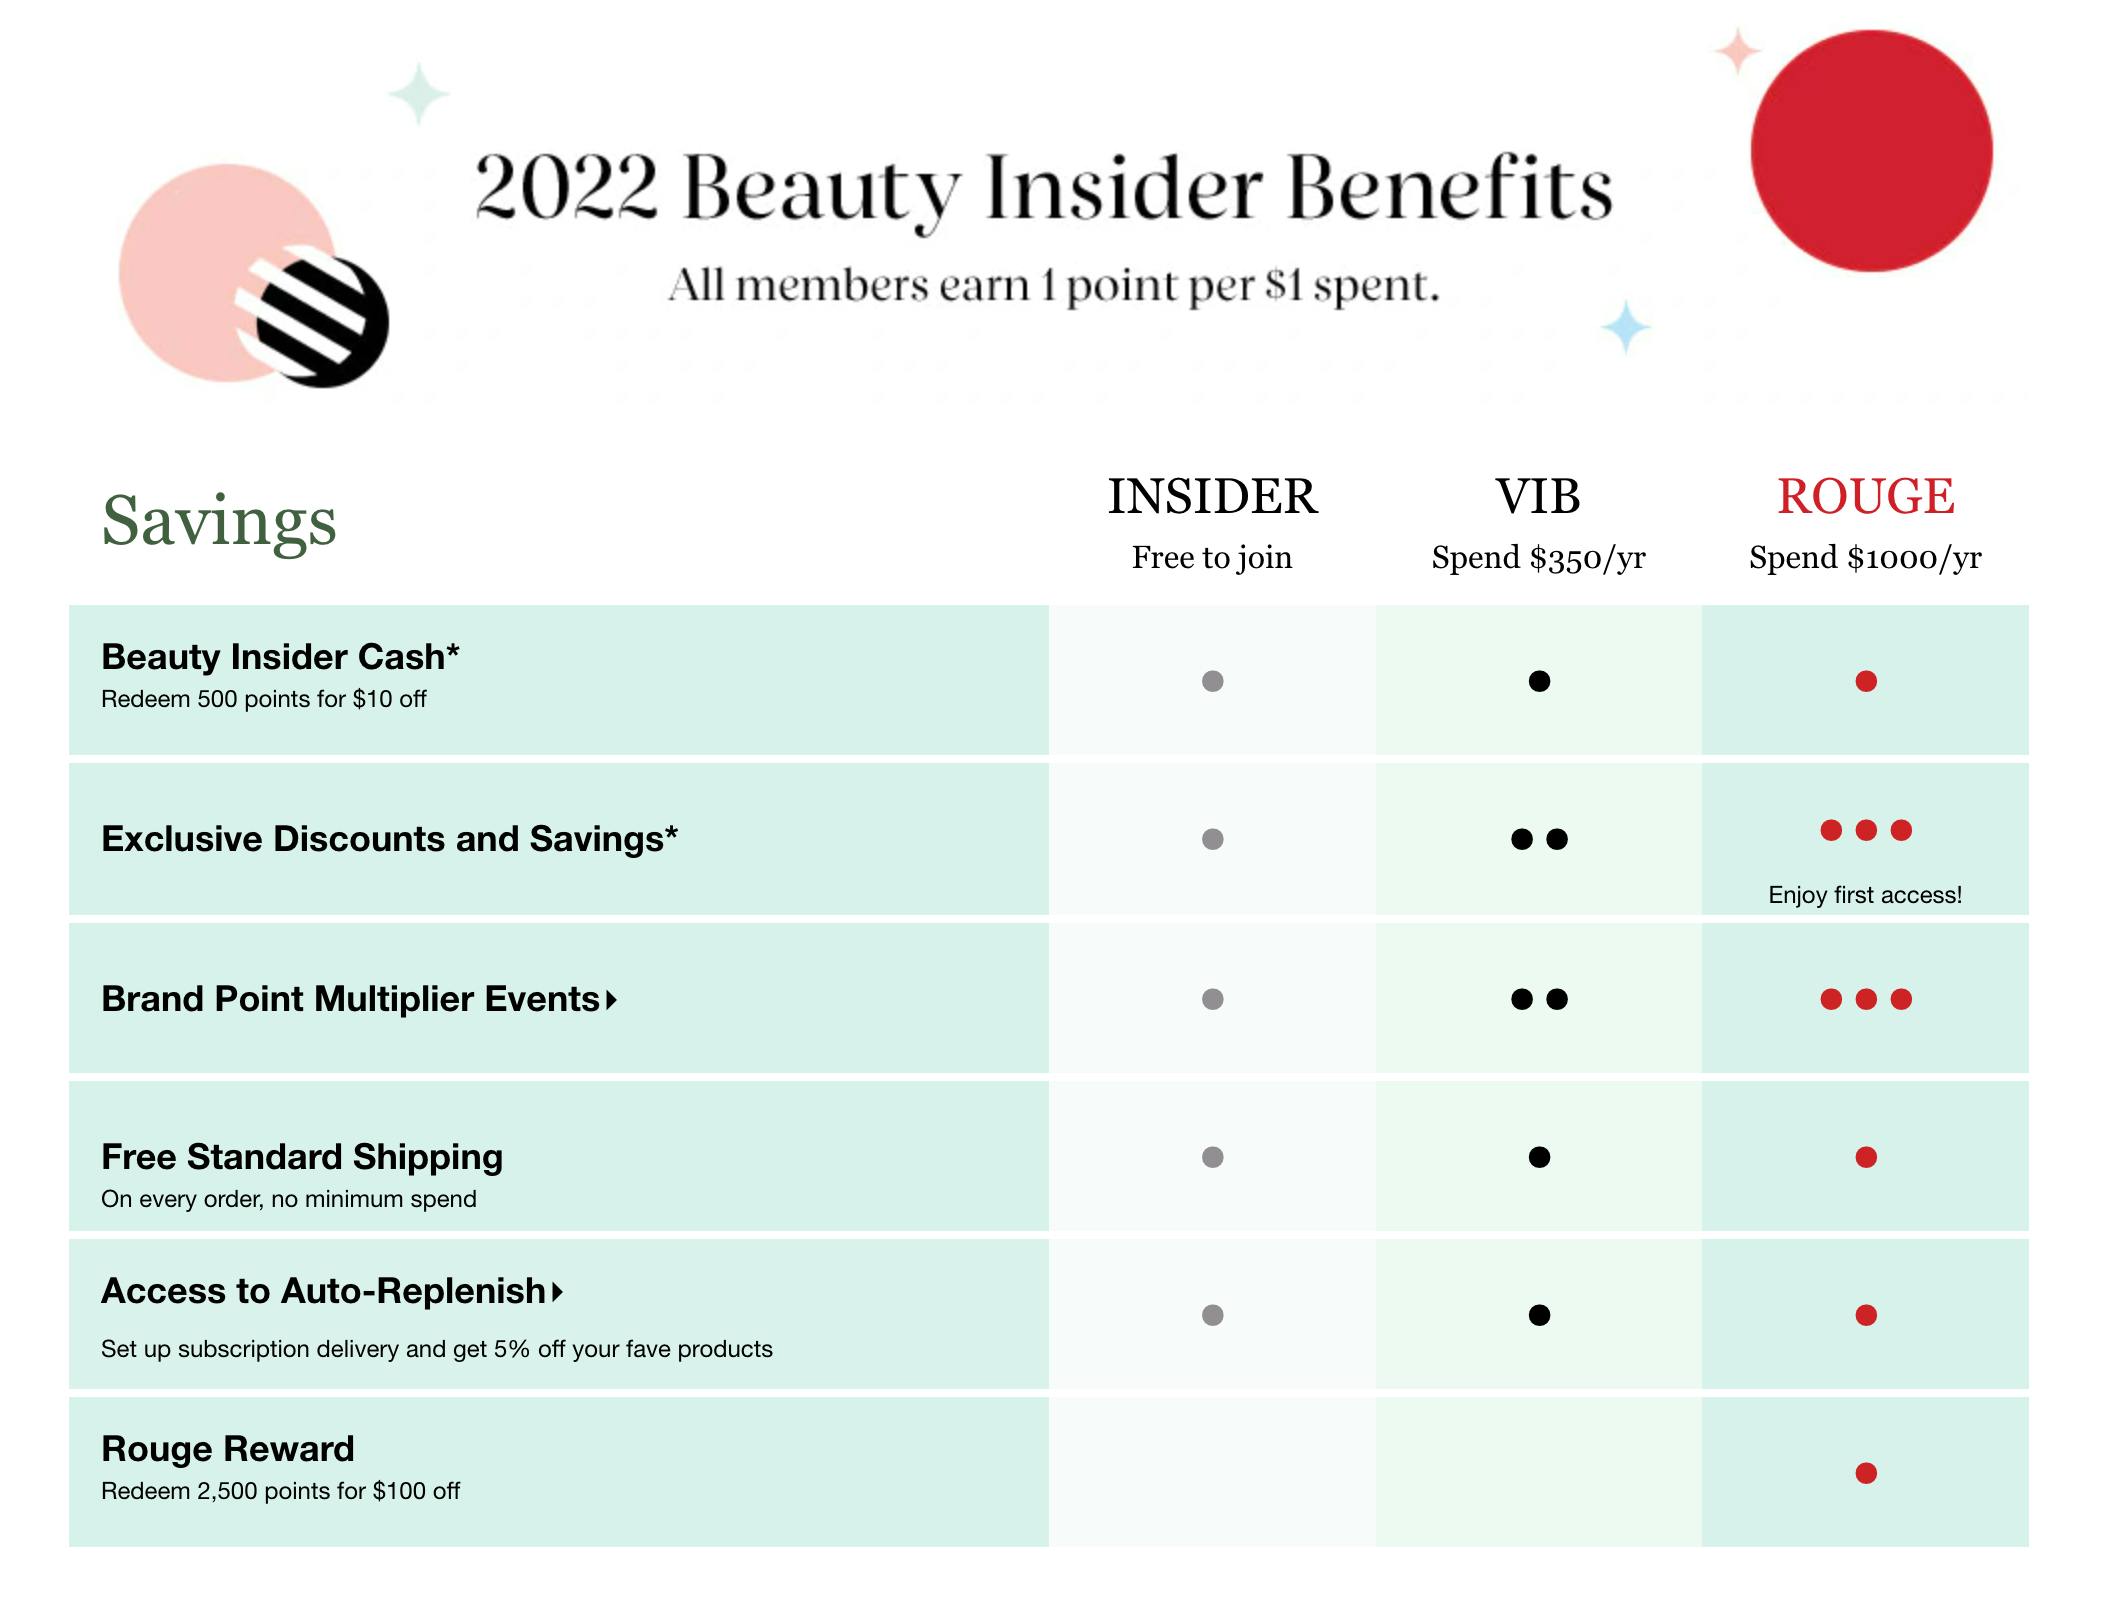 Sephora Beauty Insider Benefits for different rewards levels in 2022.